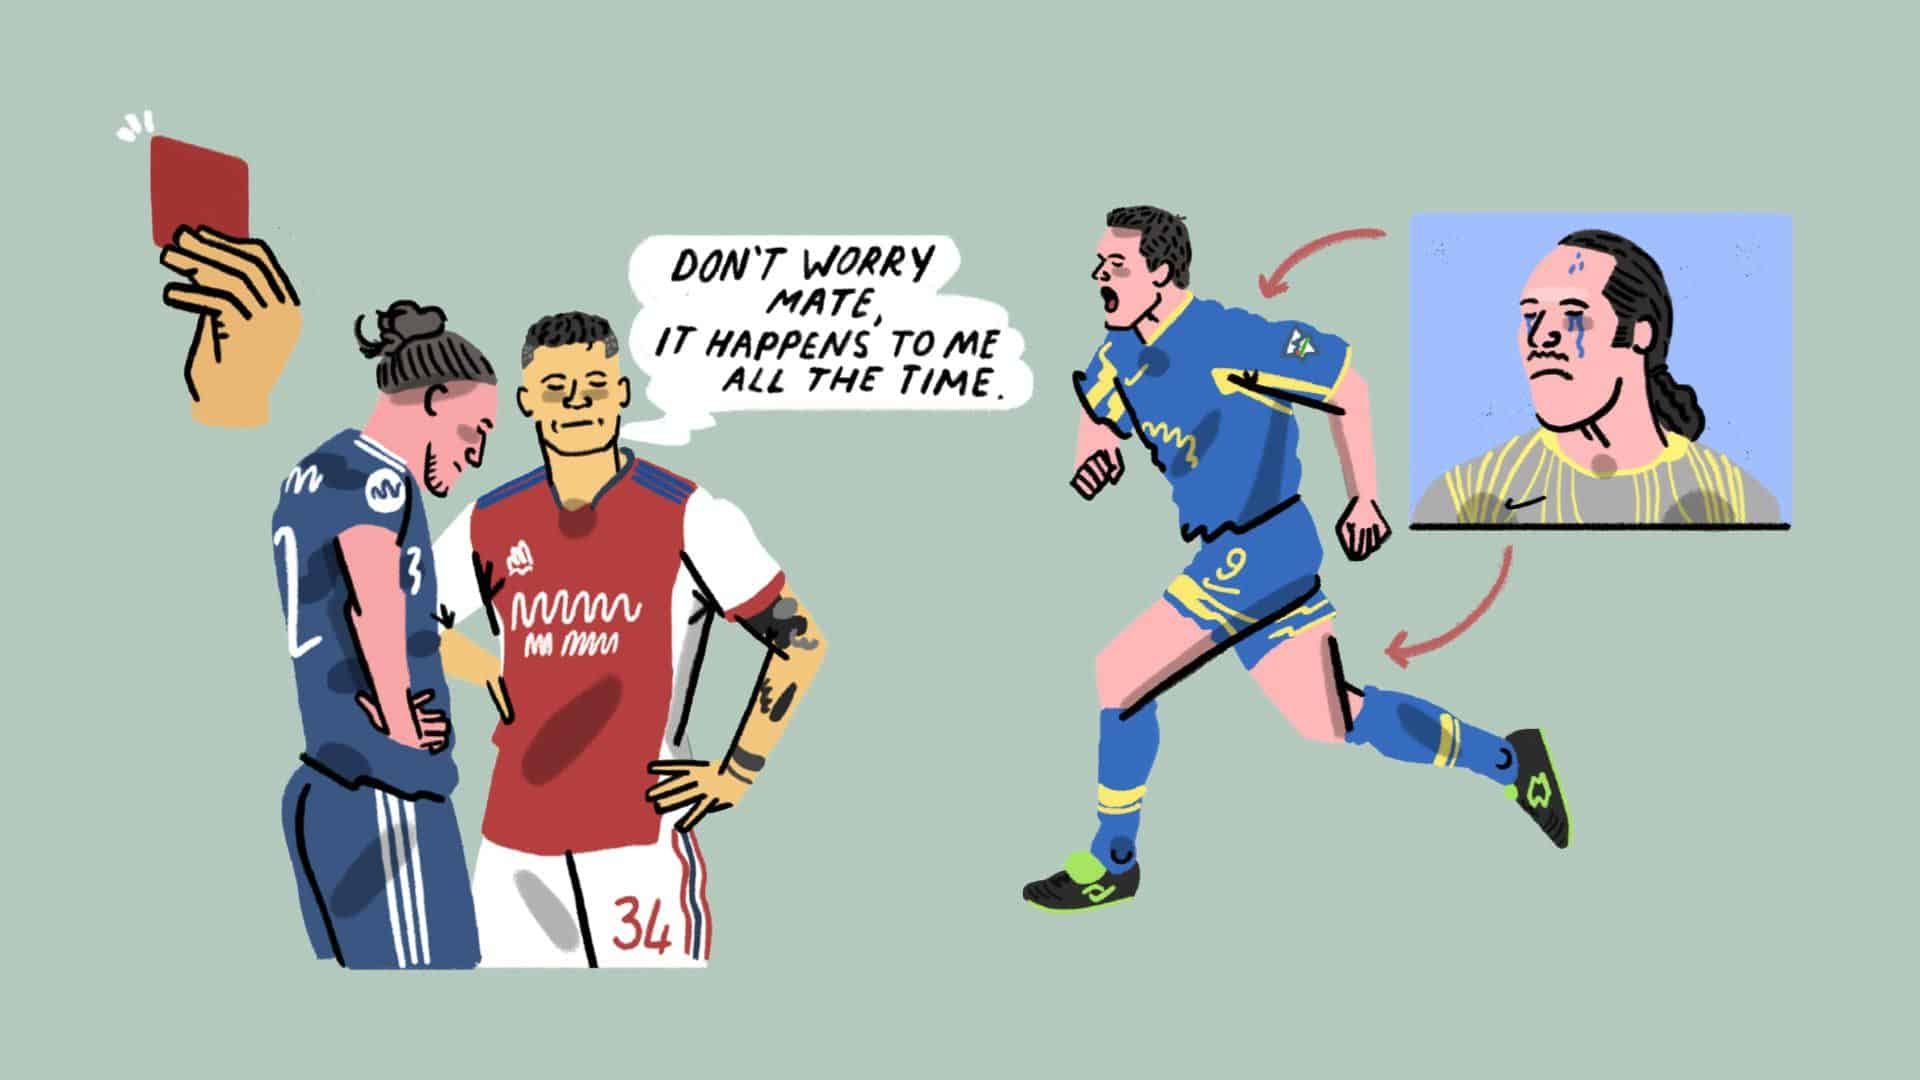 An illustration of Mark Viduka celebrating at Highbury while David Seaman cries, and Granit Xhaka telling Luke Ayling, "Don't worry mate, it happens to me all the time," with a red card hanging over them